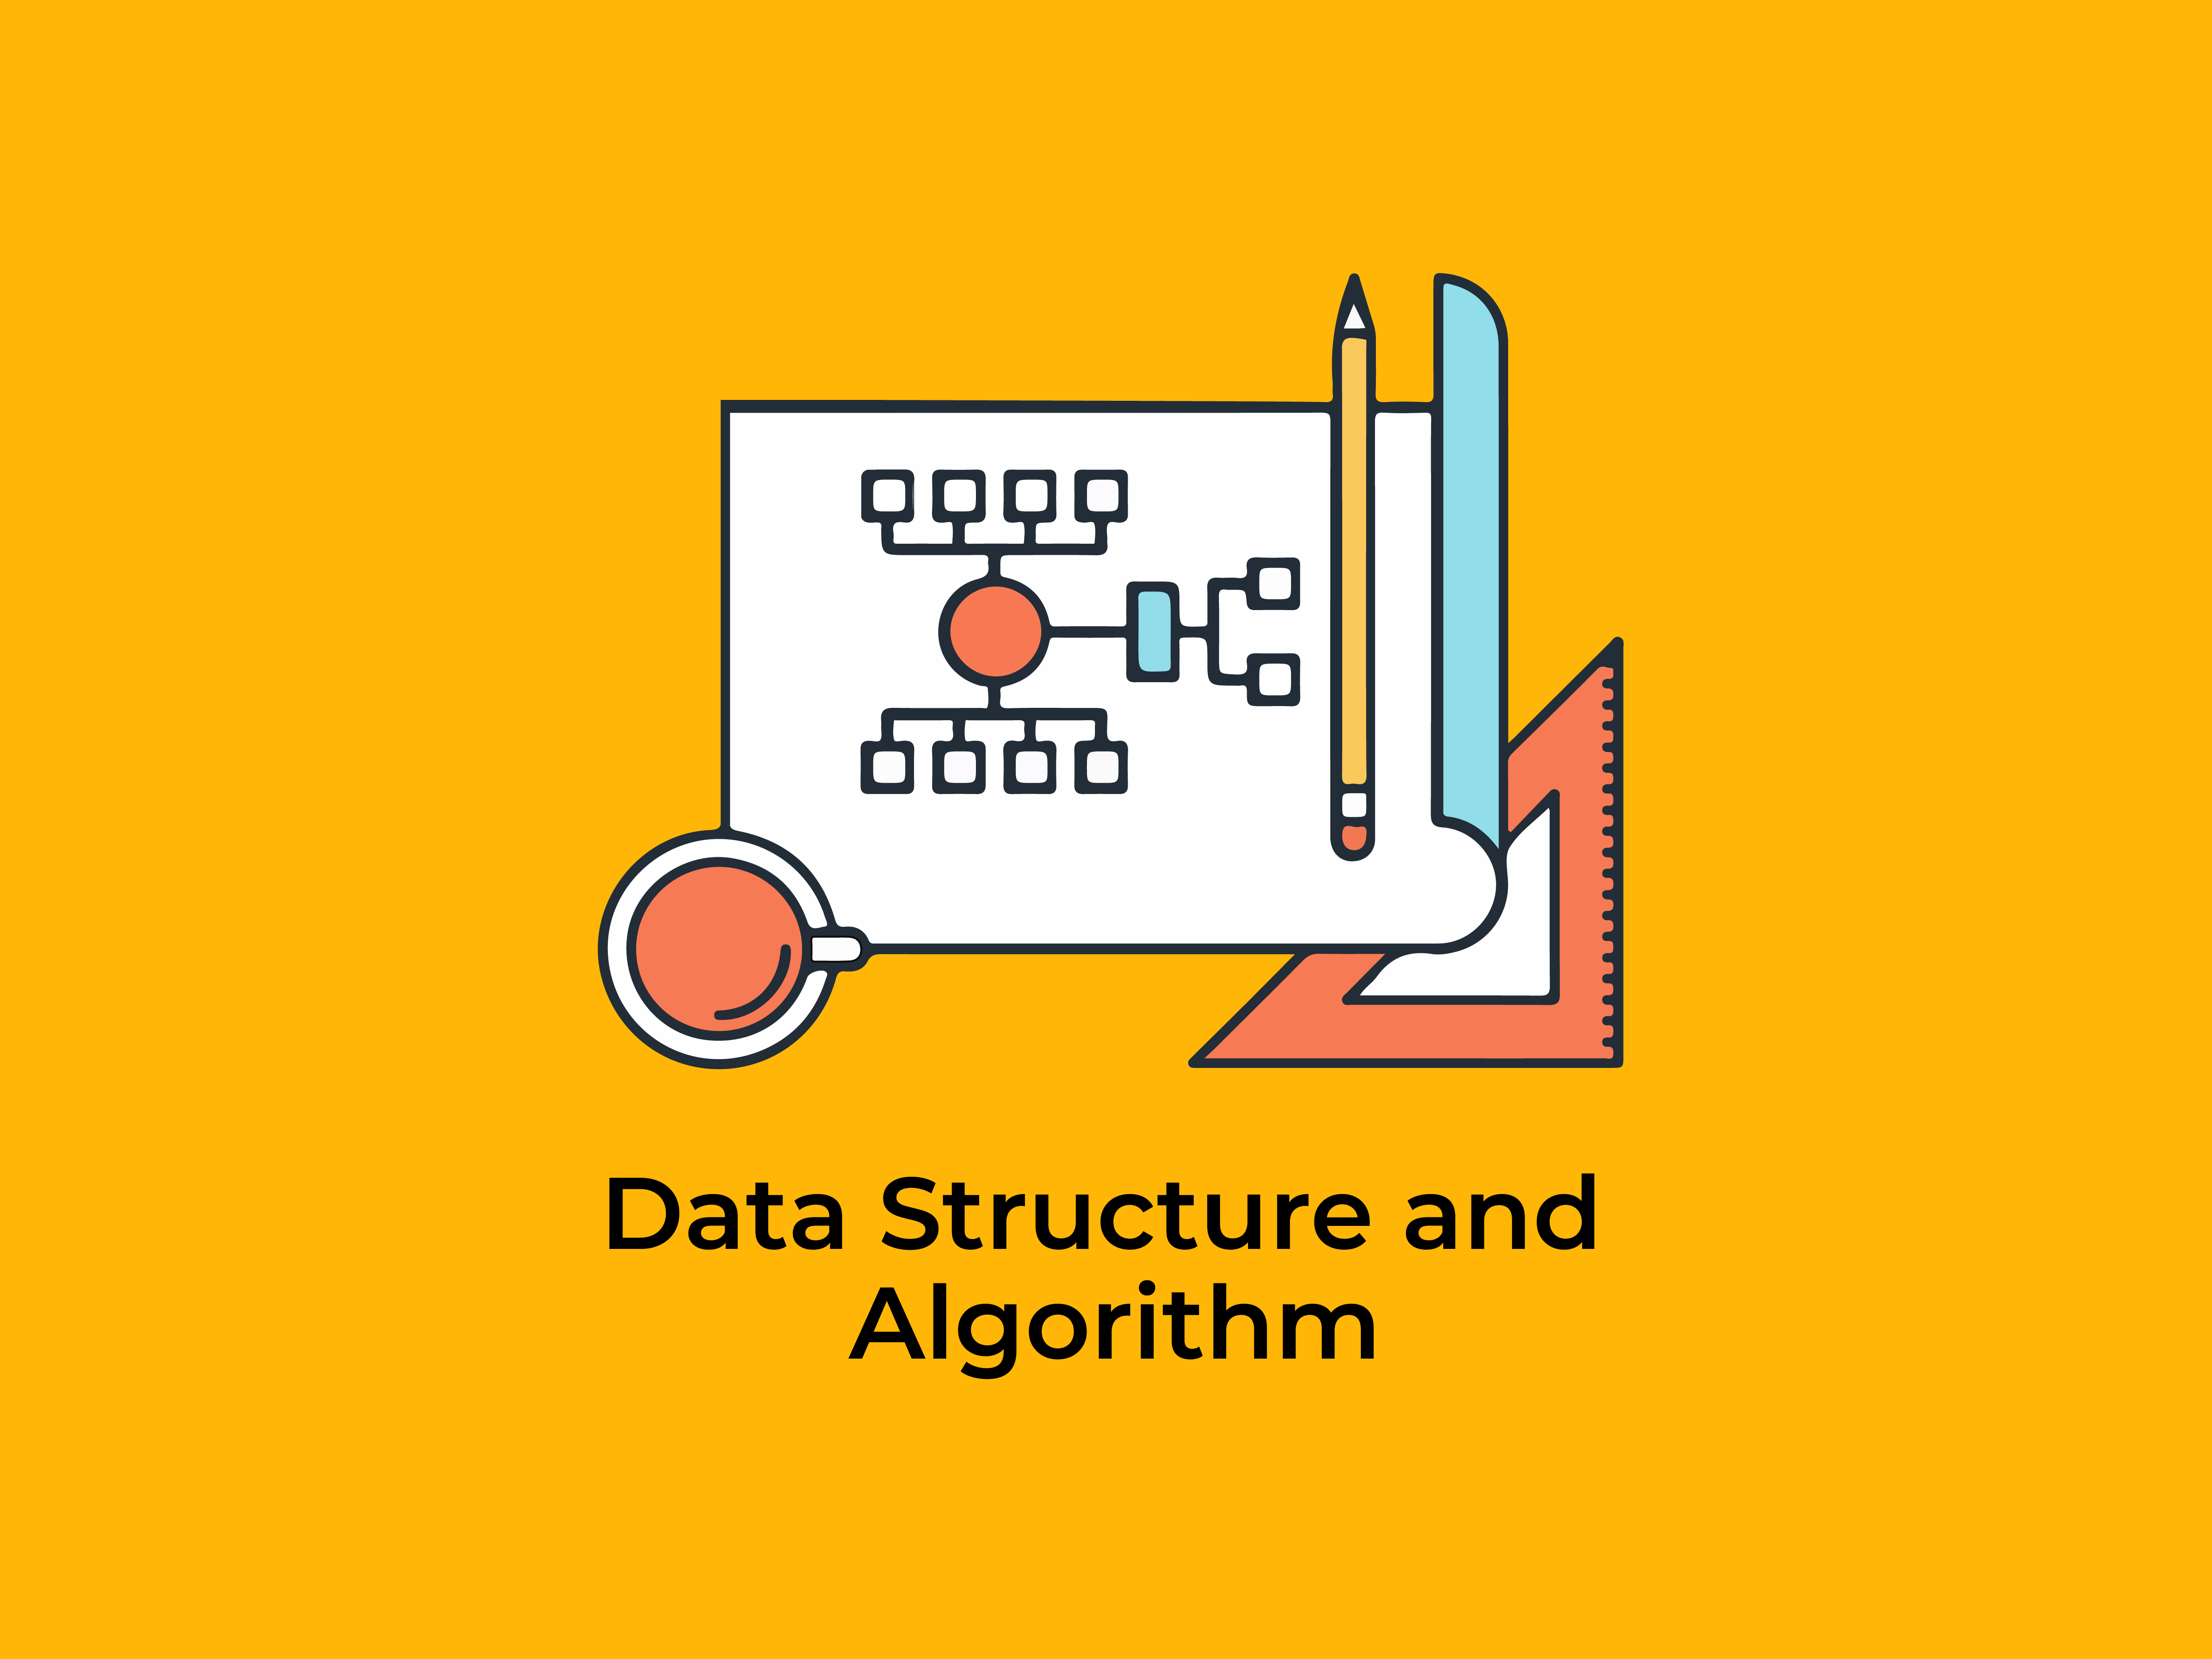 Data Structures and Algorithm for Beginners